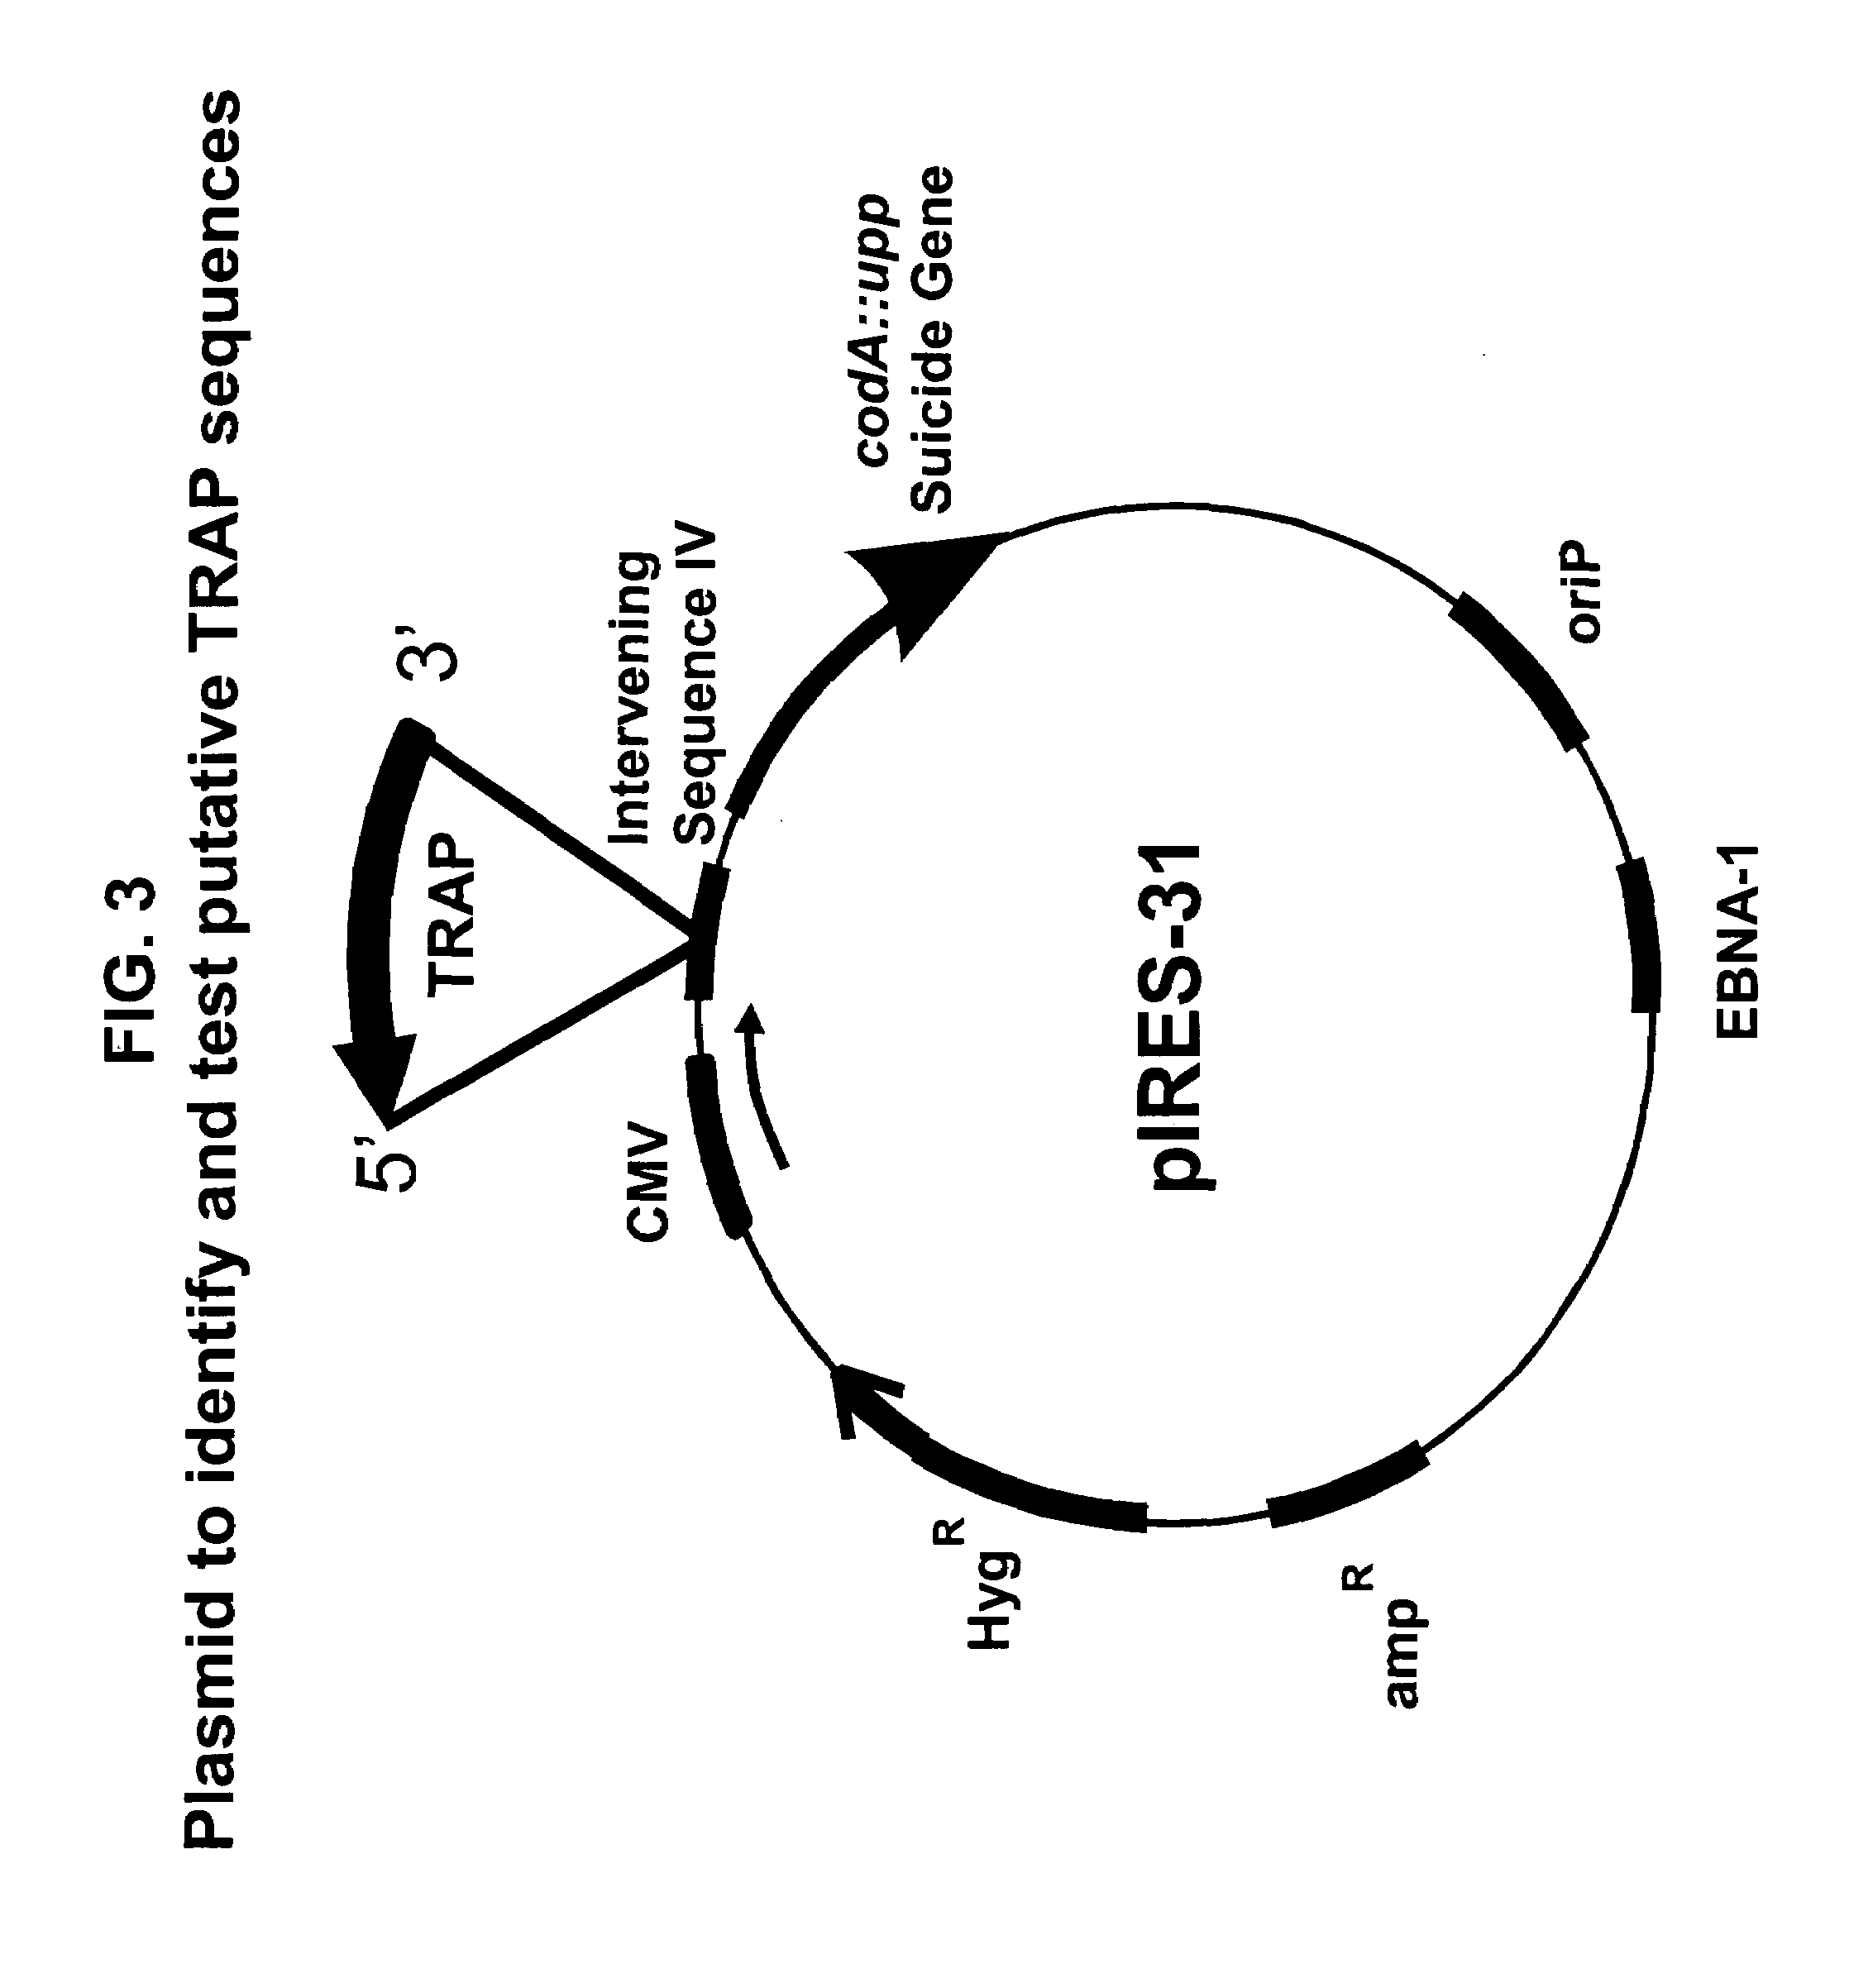 Method for improving protein production